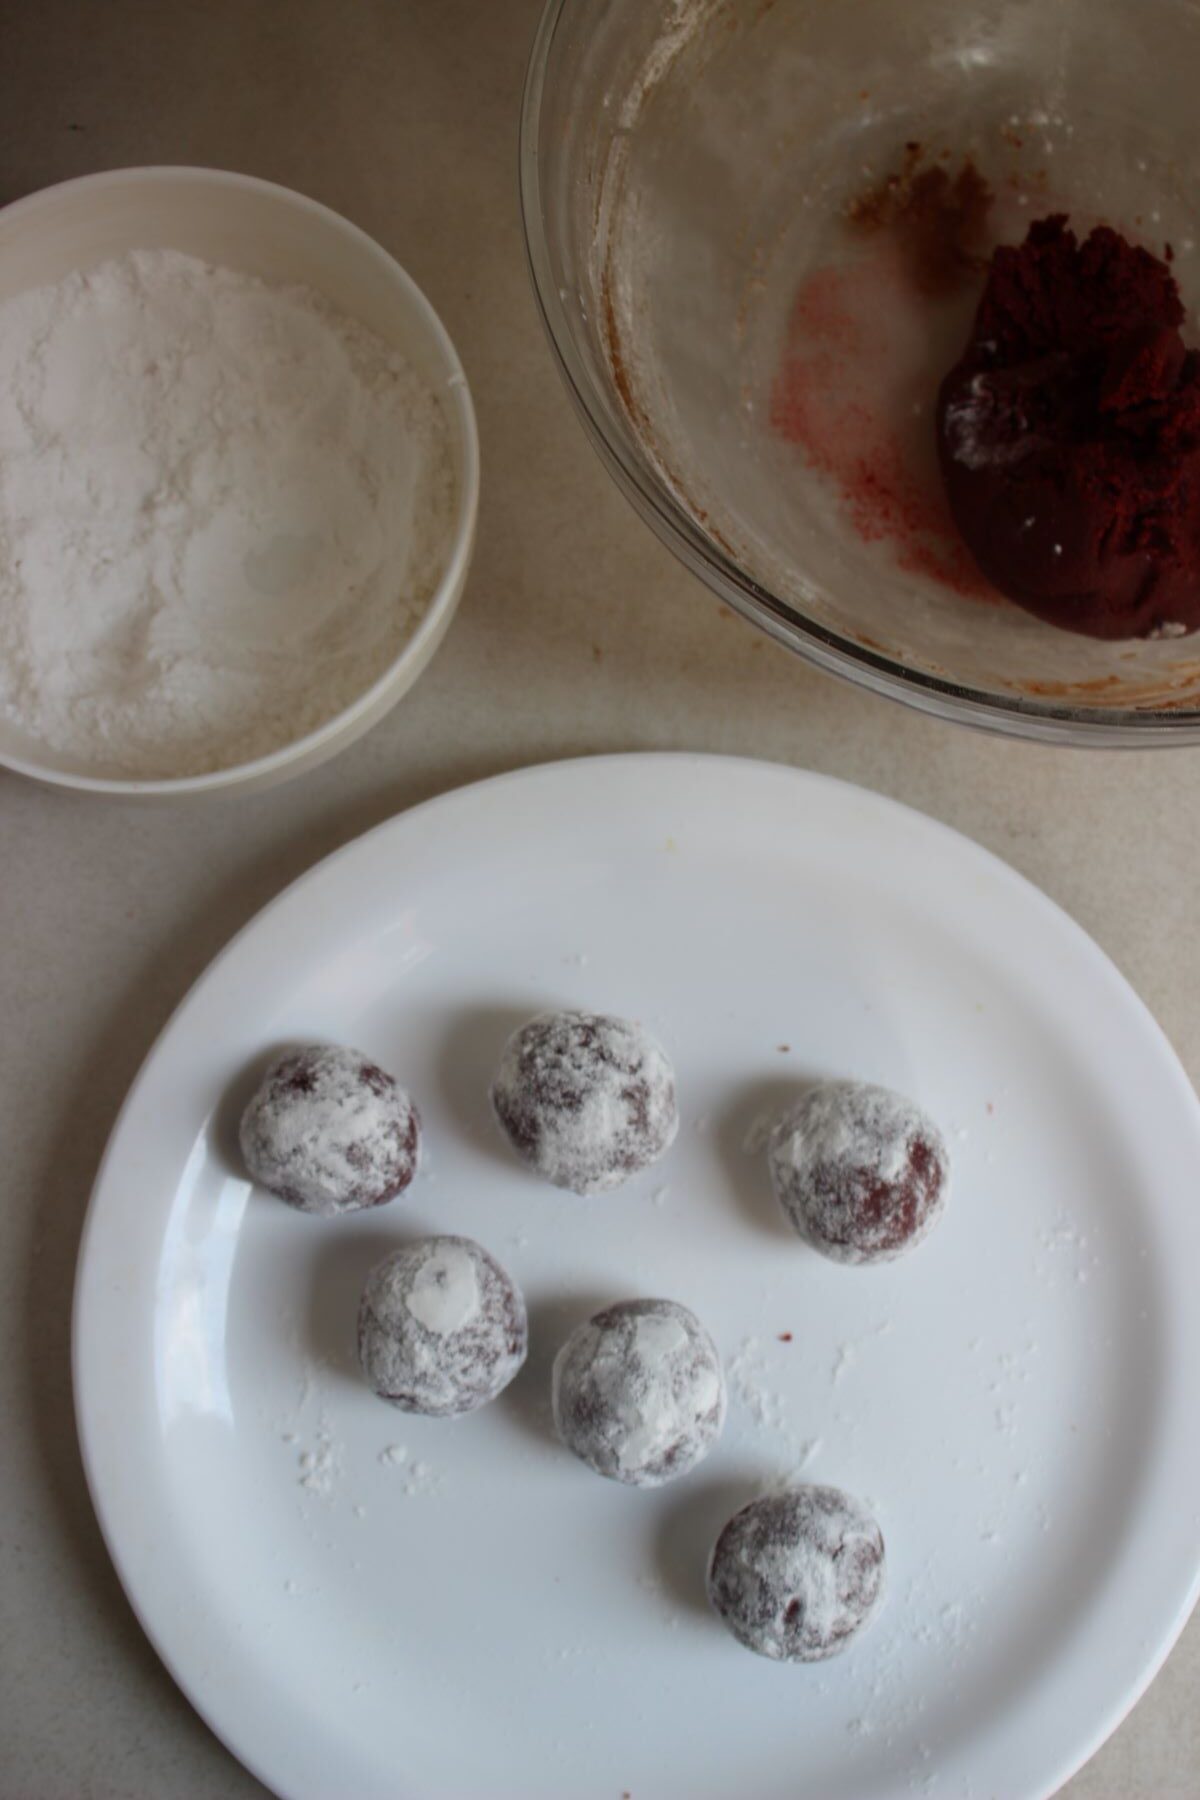 Plate with balls of dough covered with powdered sugar, Mini bowl with powdered sugar.